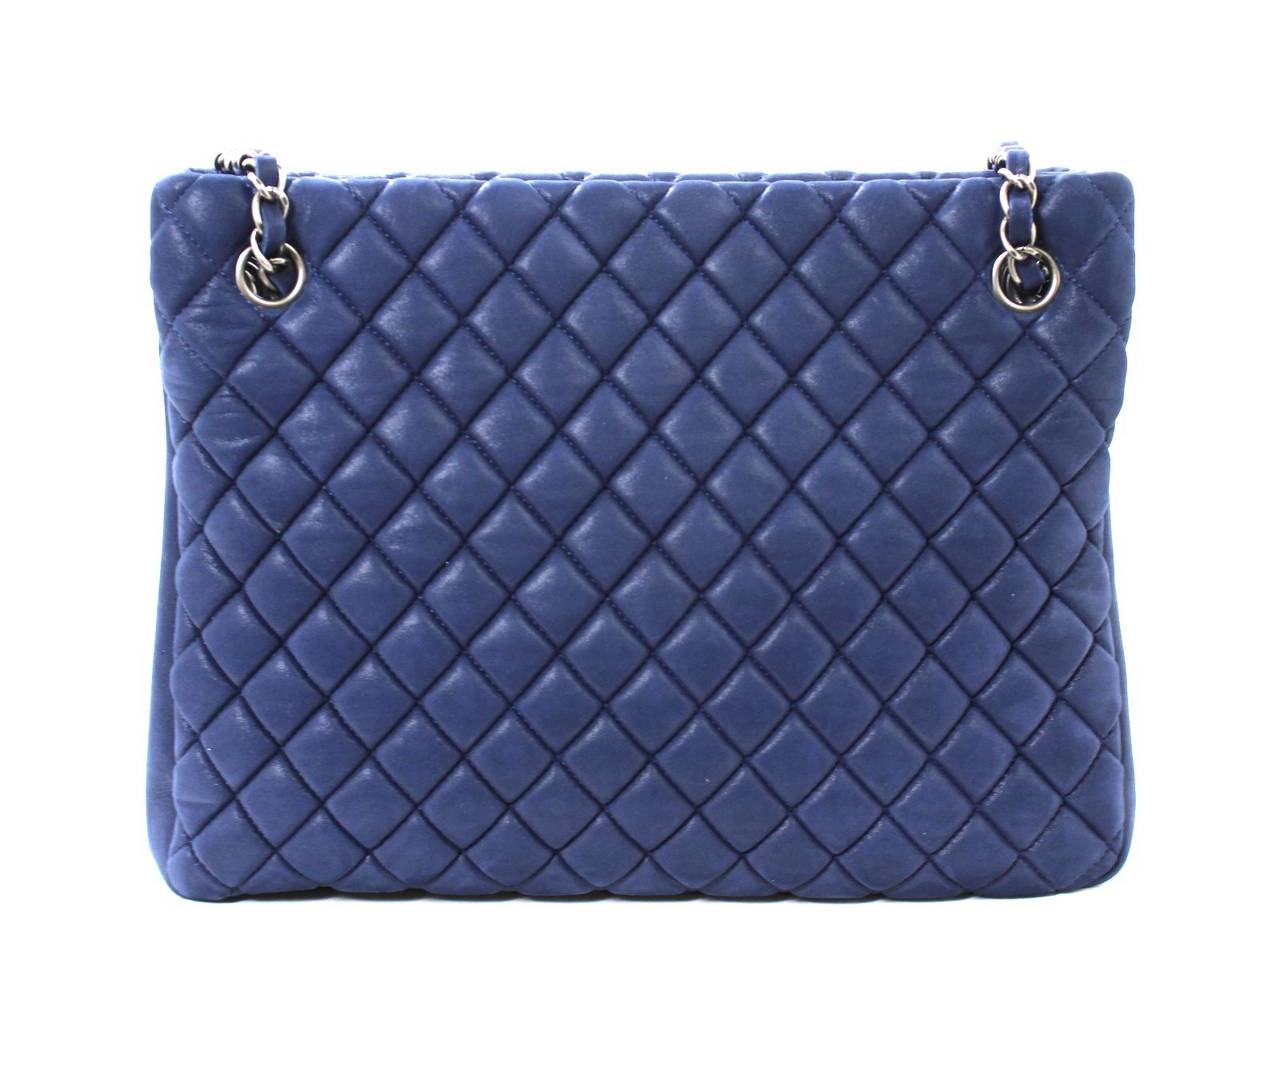 CHANEL Quilted Leather Tote- vivid cobalt blue with dark silver hardware
Never carried PRISTINE condition (former store display).

Deep cornflower blue brushed leather is quilted in signature Chanel diamond stitched pattern.  Dark silver hardware